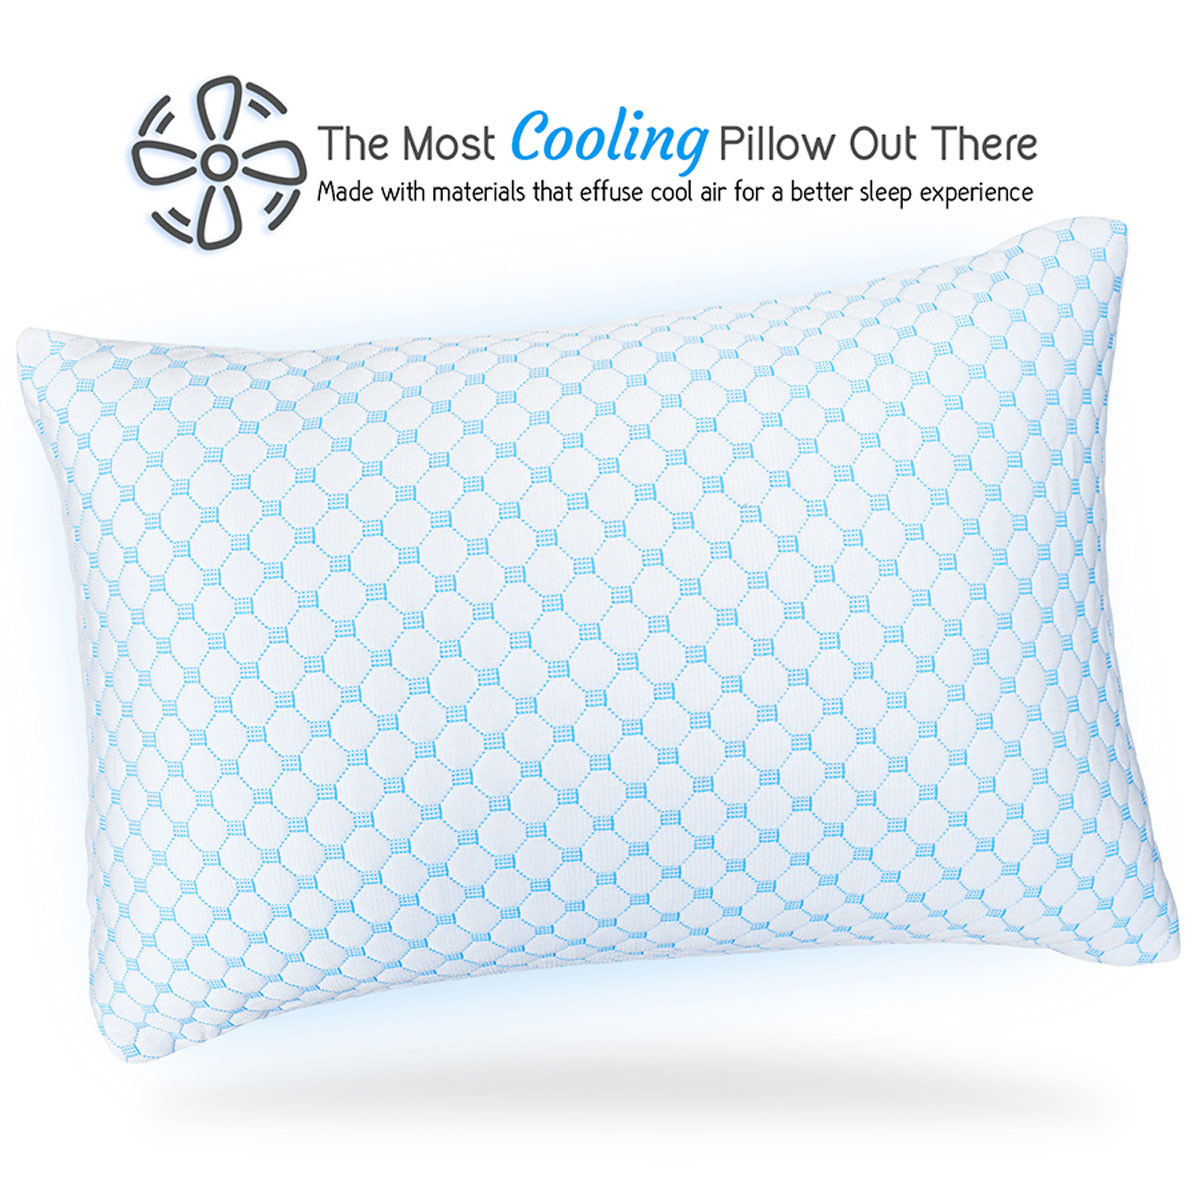 What is the filling of the Clara Clark Reversible Cooling Pillow?